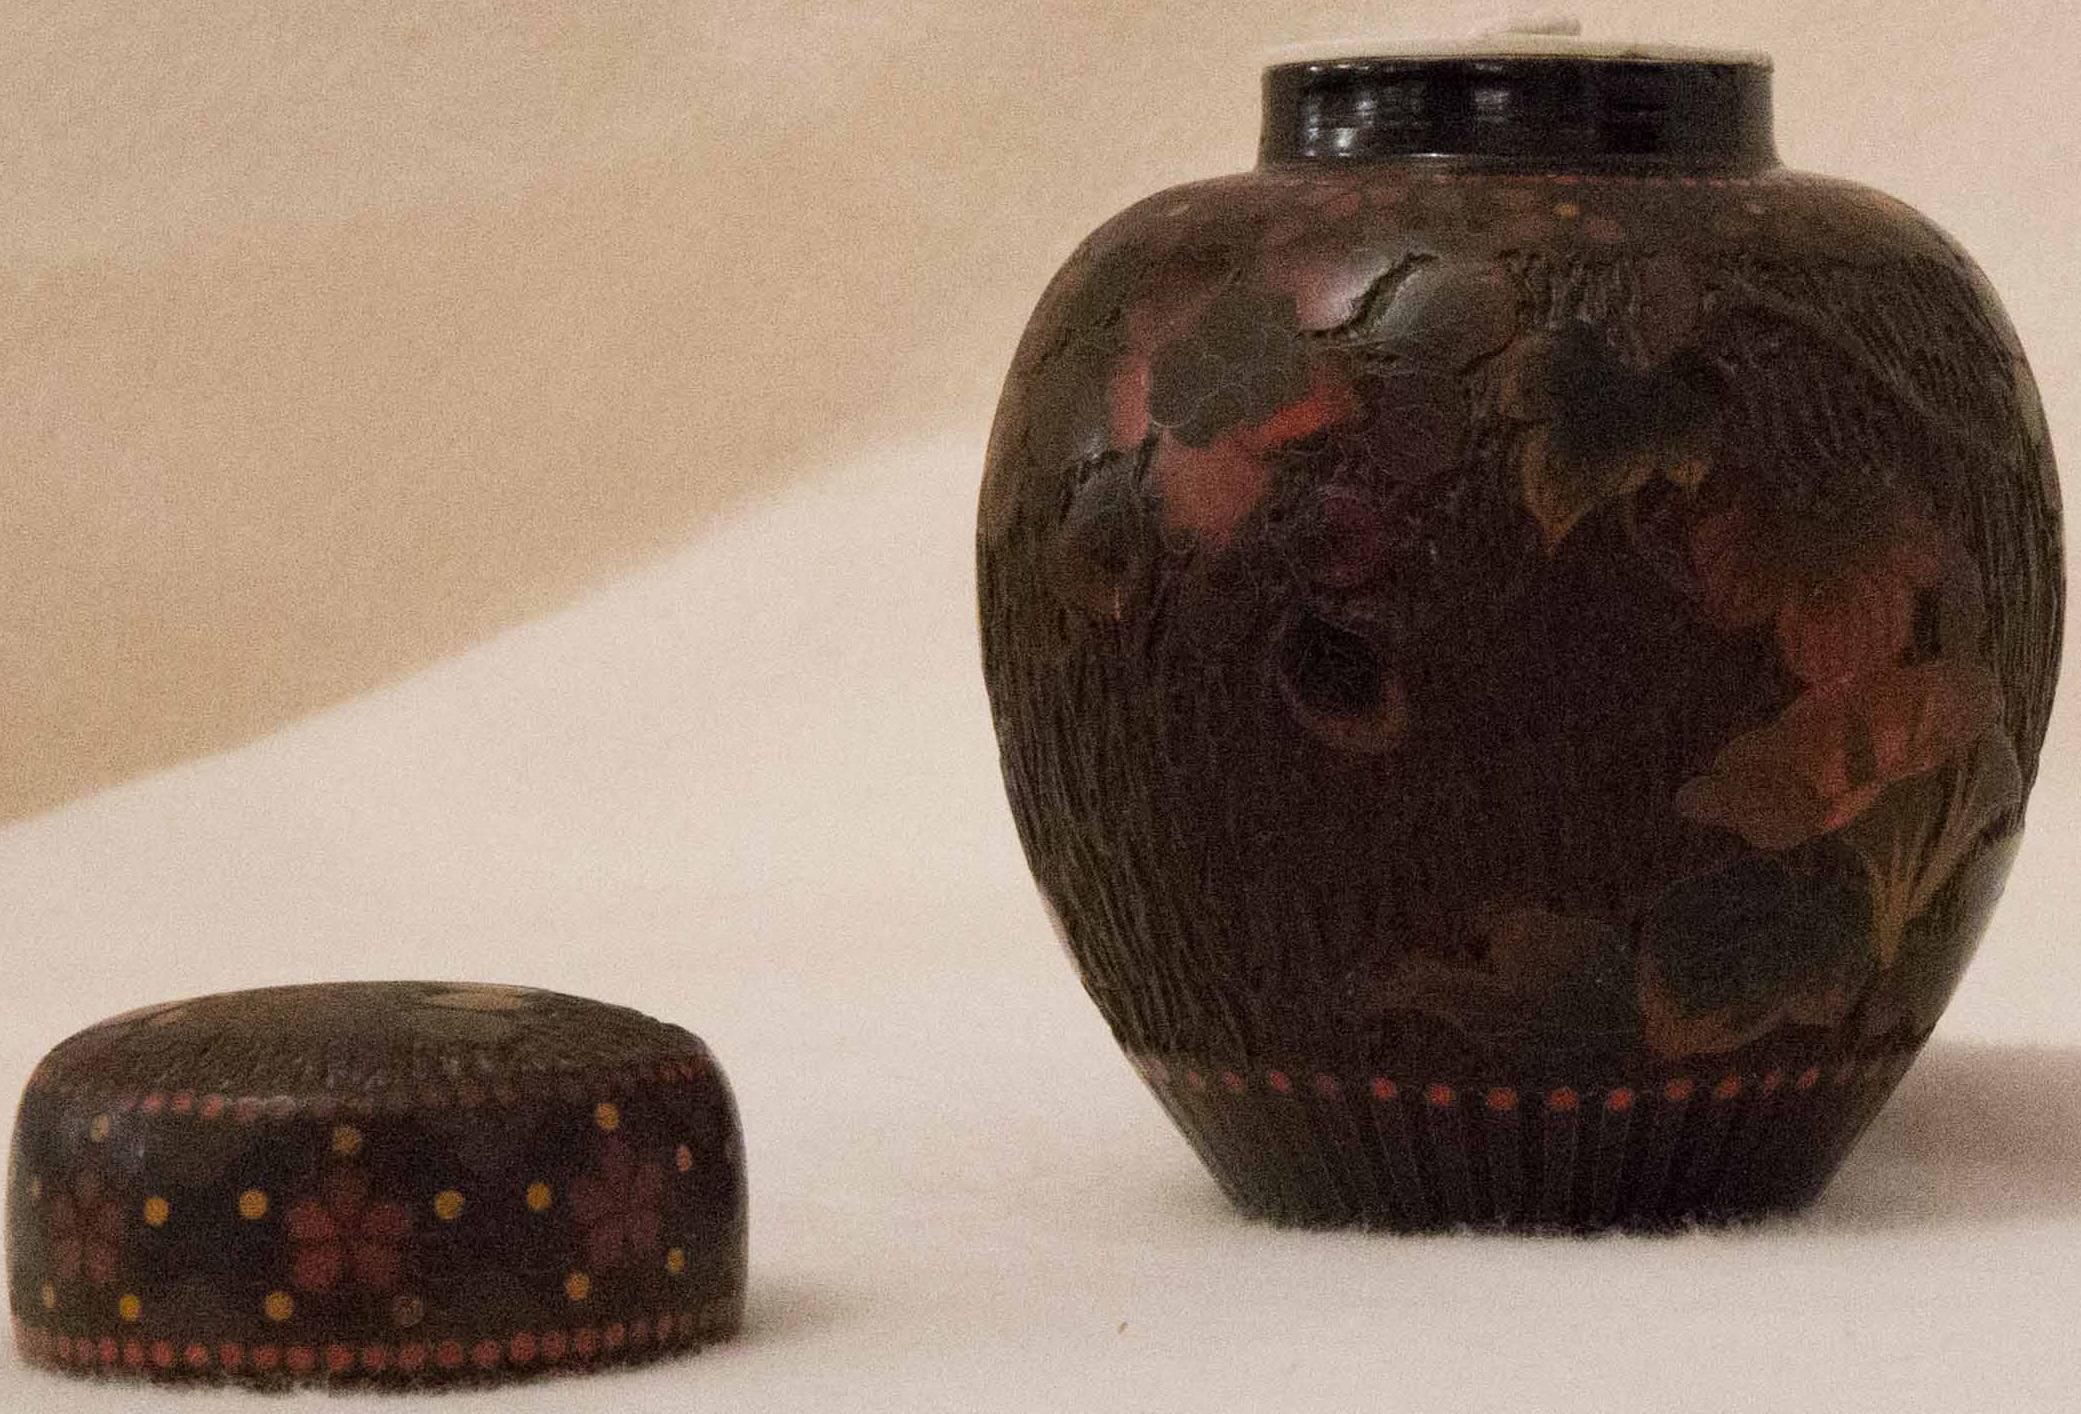 Enamel cloisonneé on porcelain (jiki shippo) tea caddy having rare earth colors and design. The jiki shippo technique imitates tree back. The lacquered surface of black and brown, with merging orange yellows and red colors all merge into the design